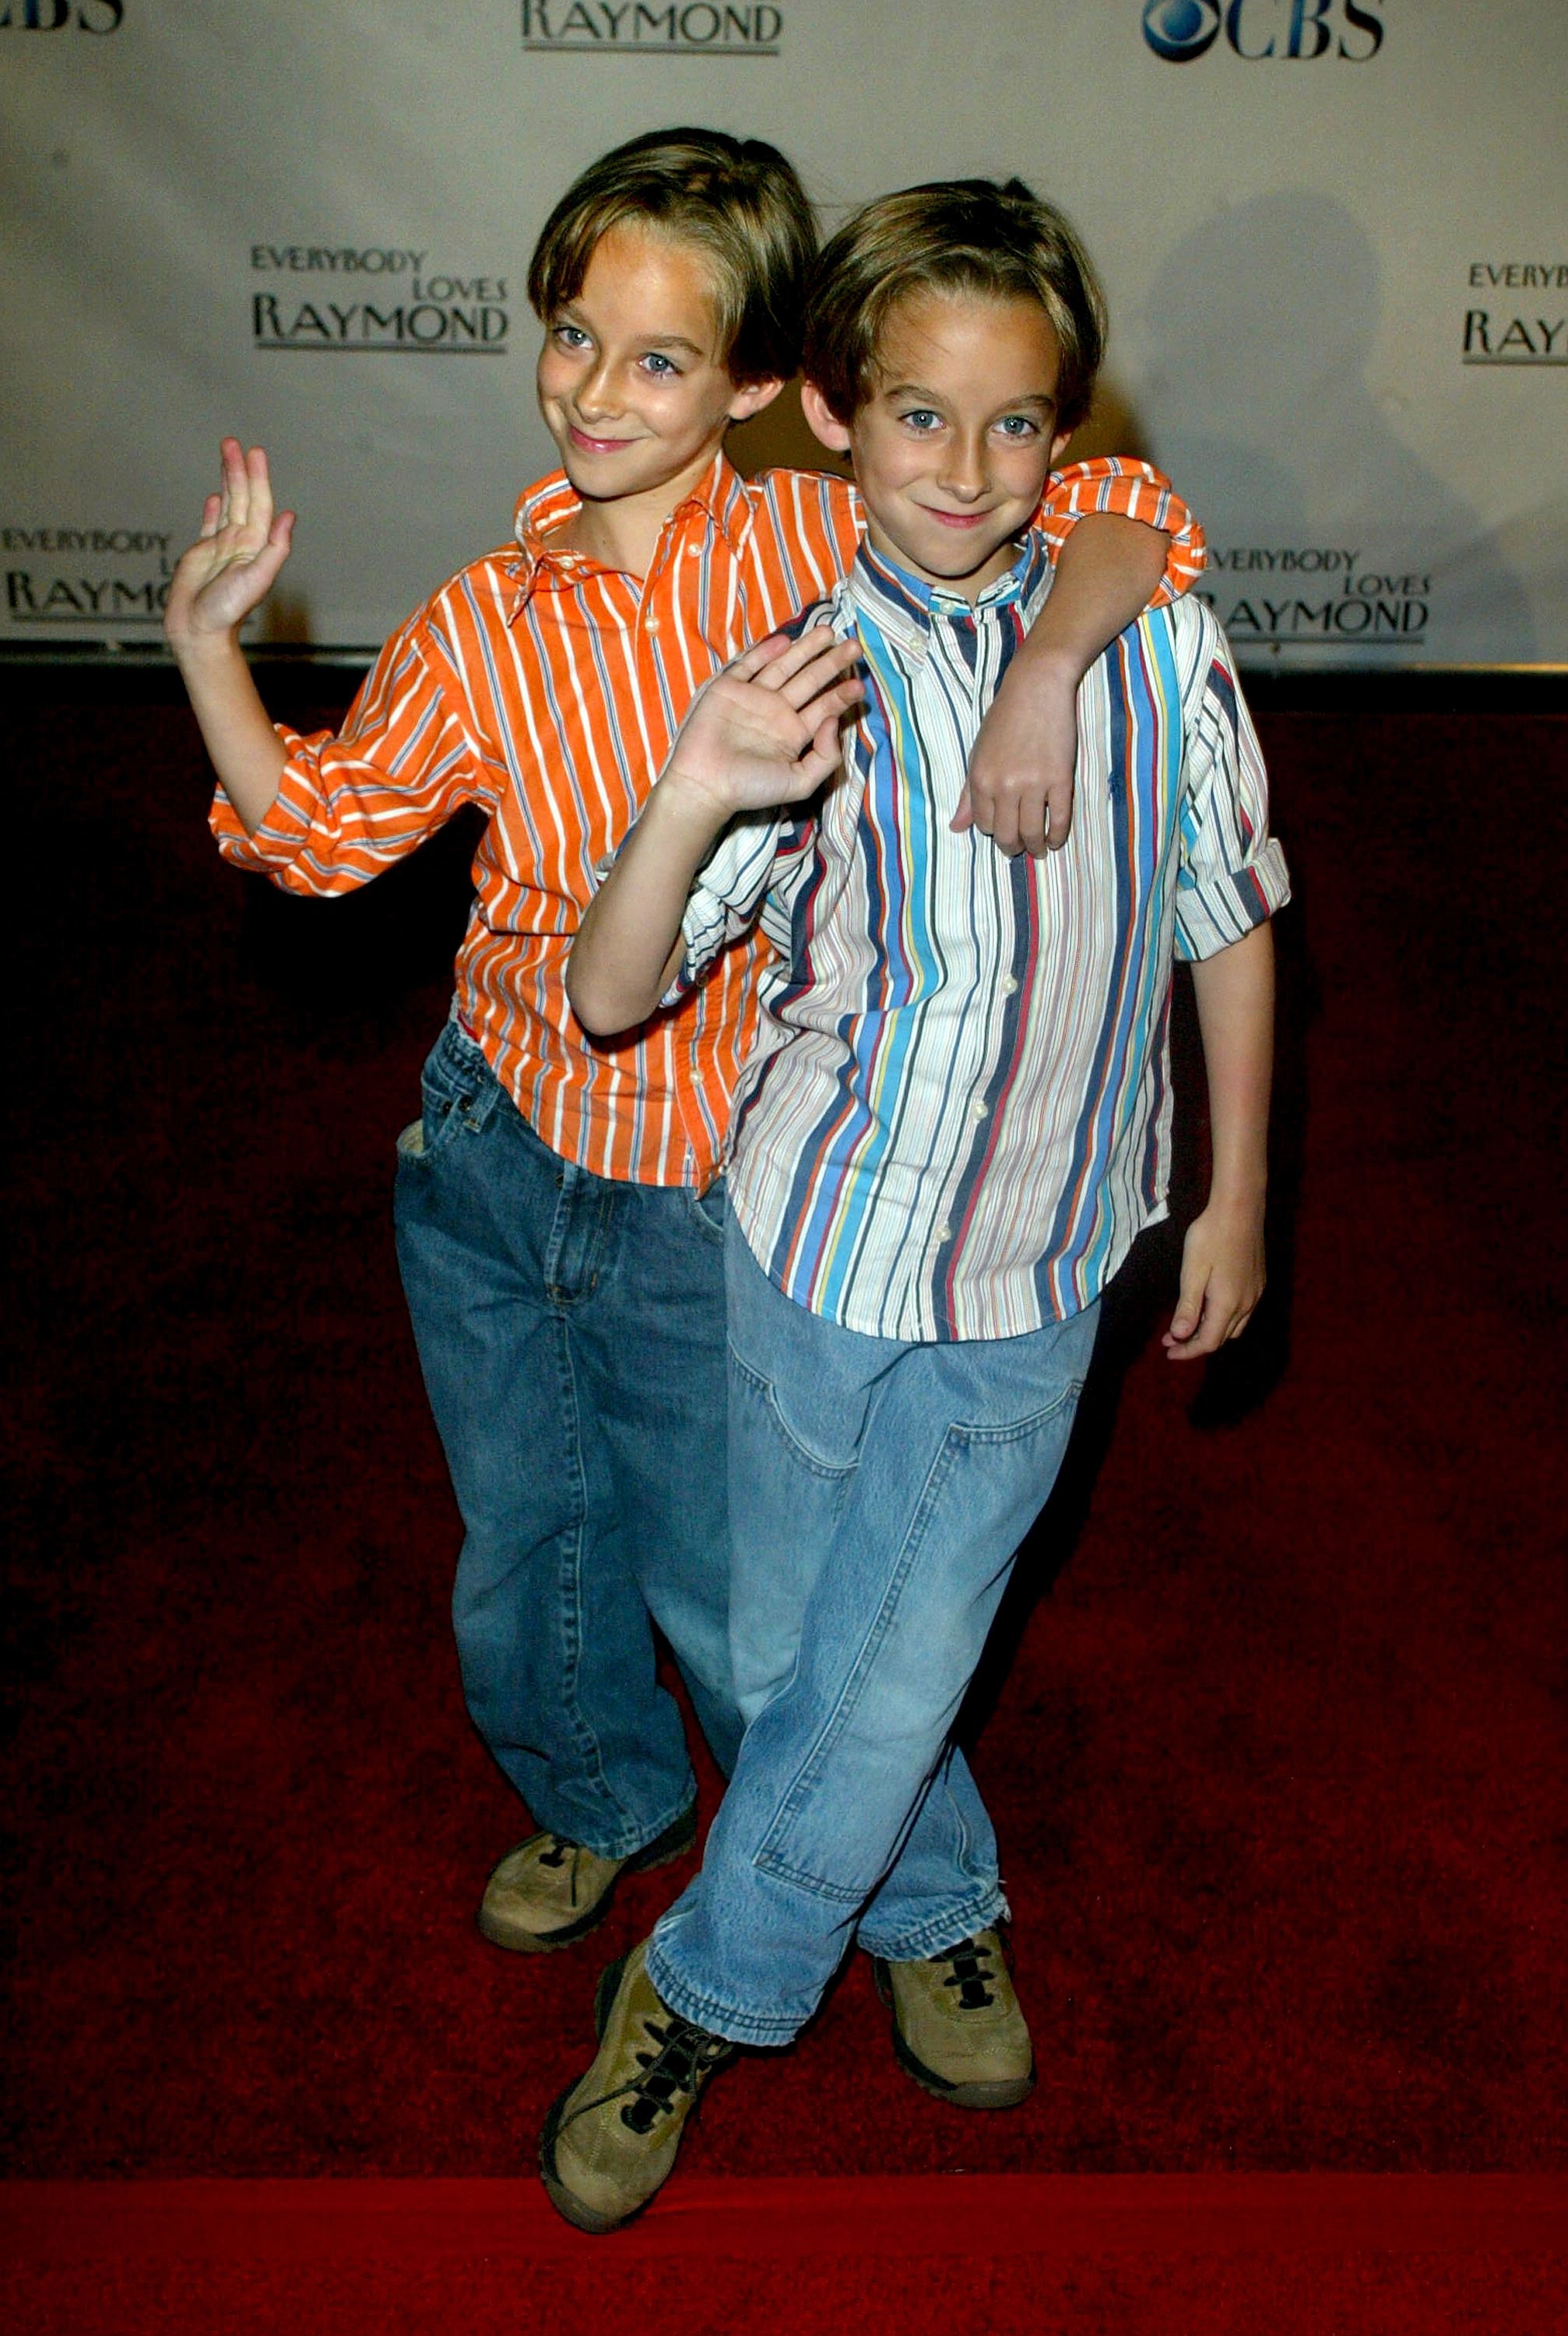 Sullivan and Sawyer Sweeten at the "Everybody Loves Raymond" Series Wrap Party on April 28, 2005, in Santa Monica, California | Source: Getty Images